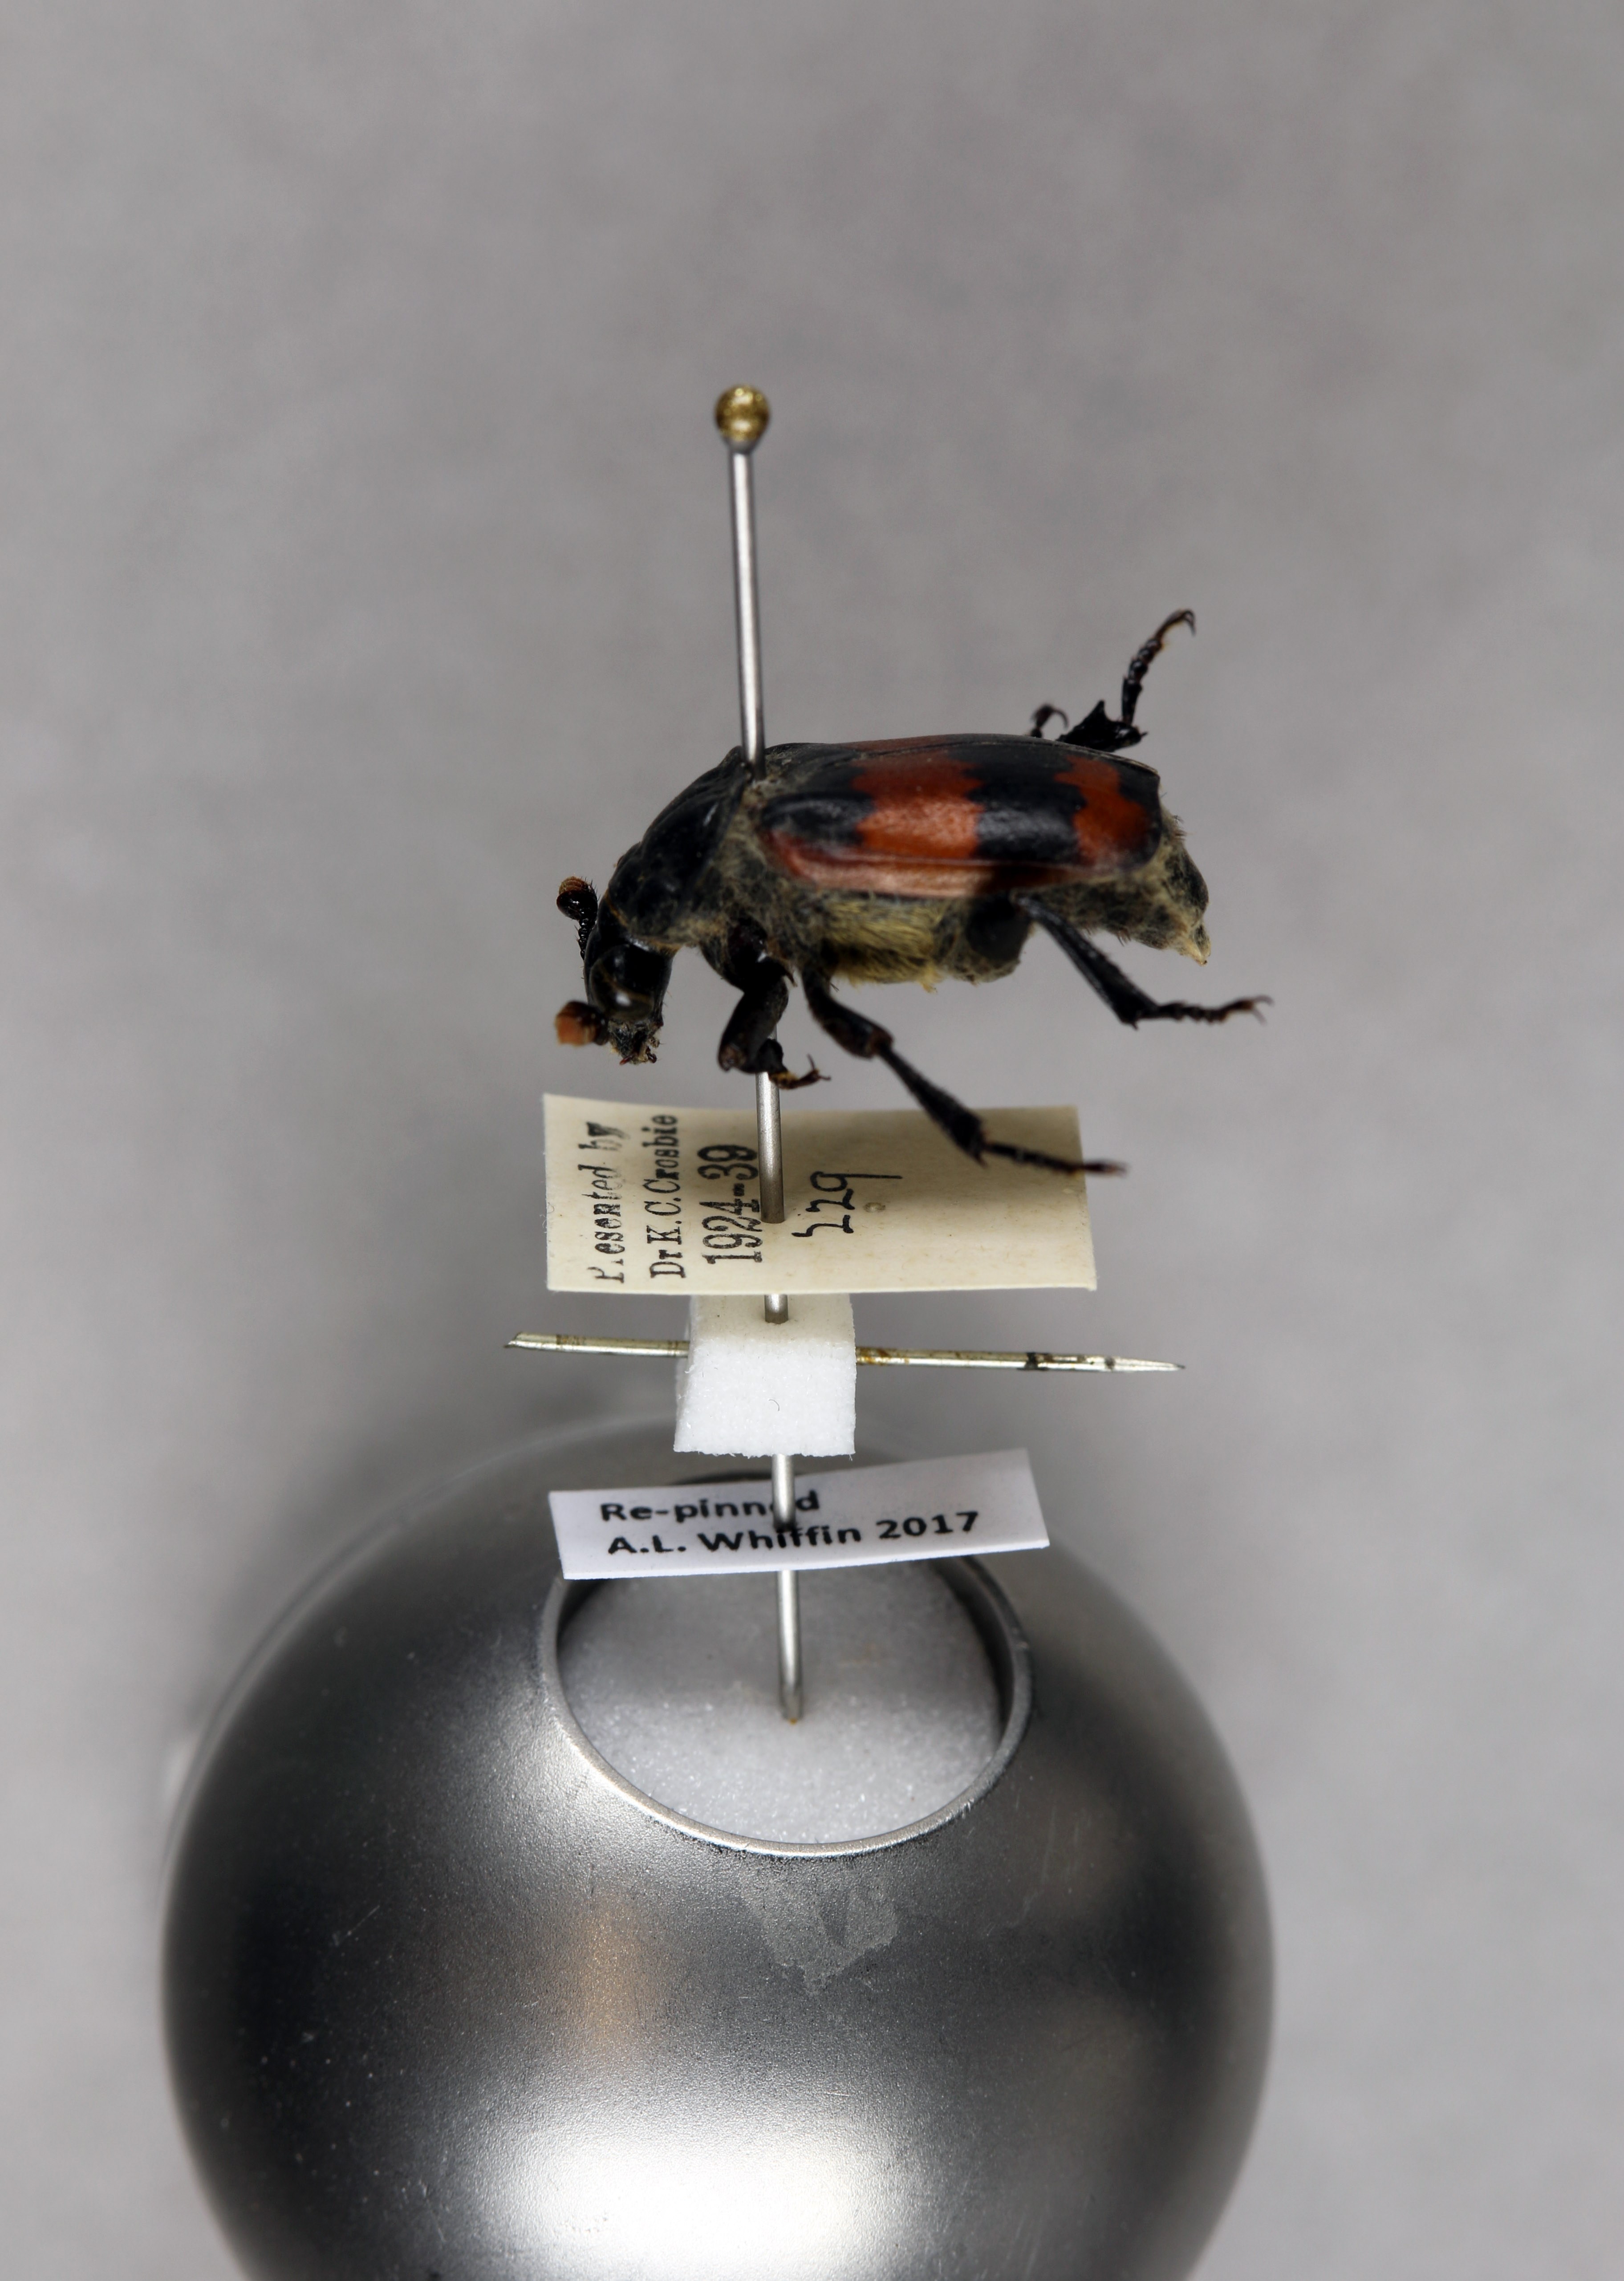 A freshly pinned entomology specimen with attached labels